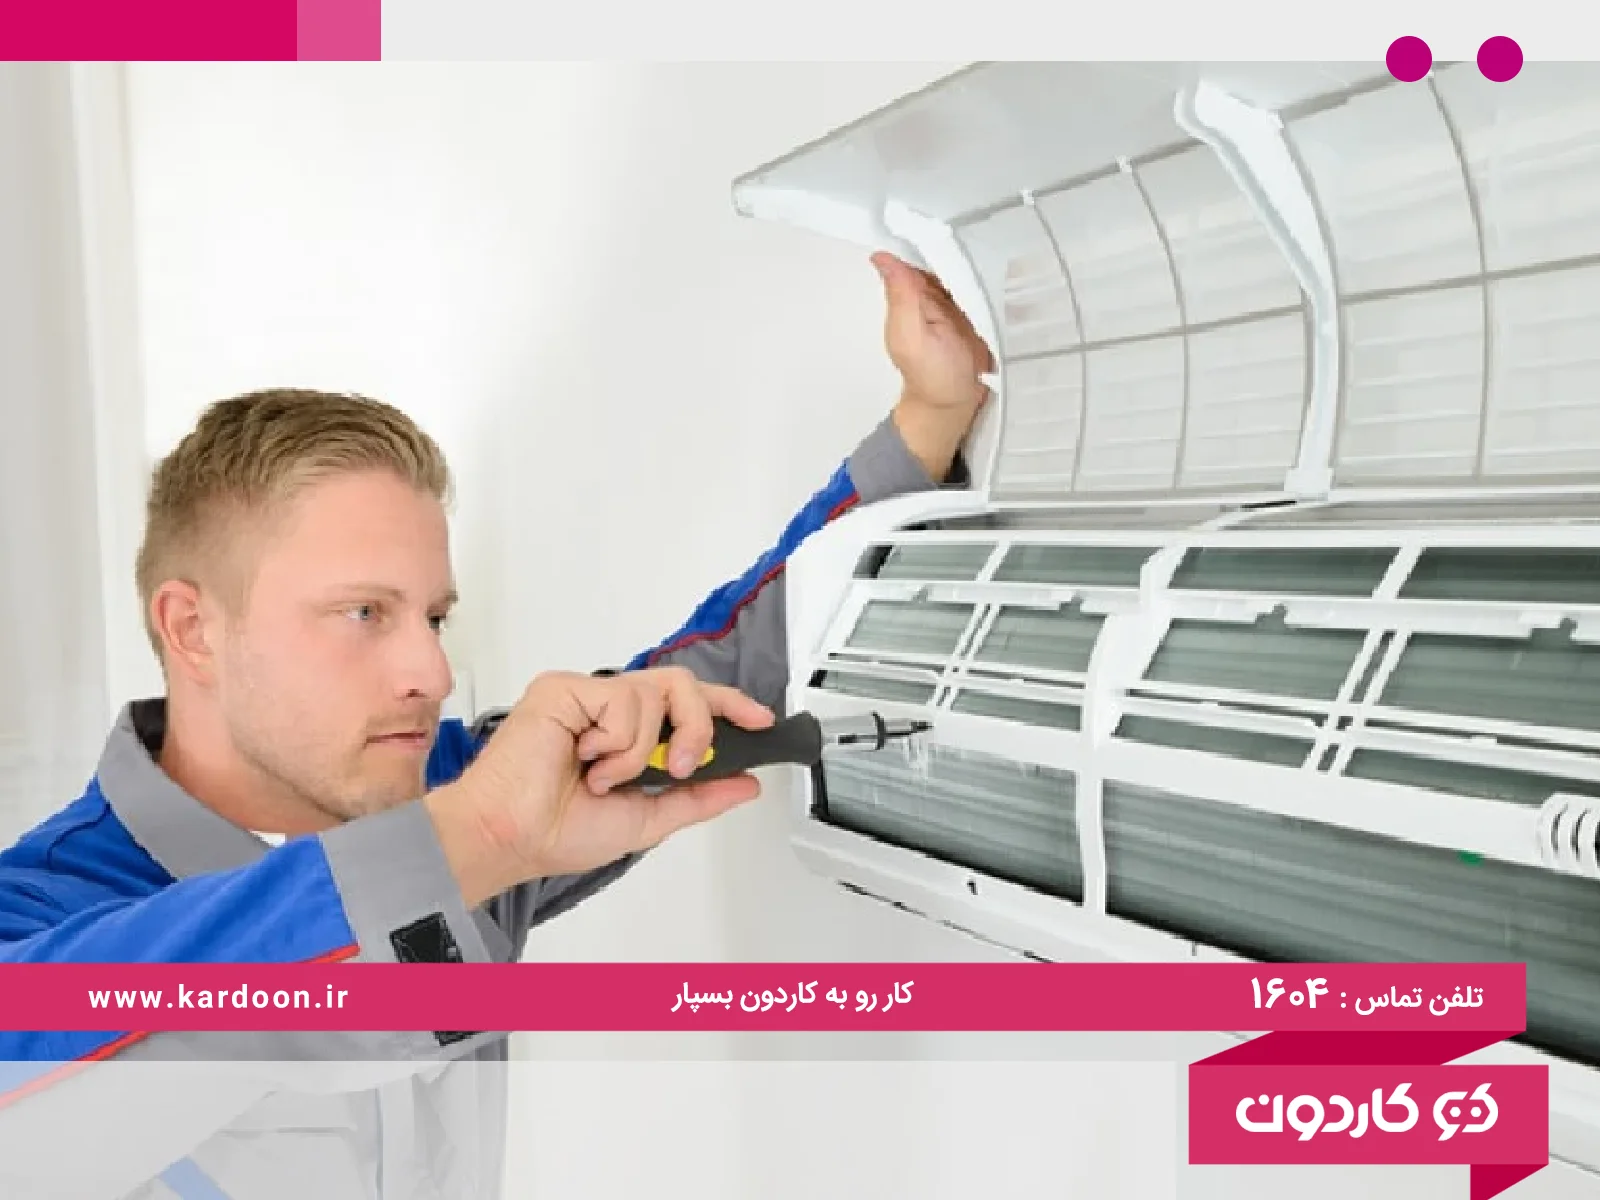 How to diagnose the lack of air conditioner gas